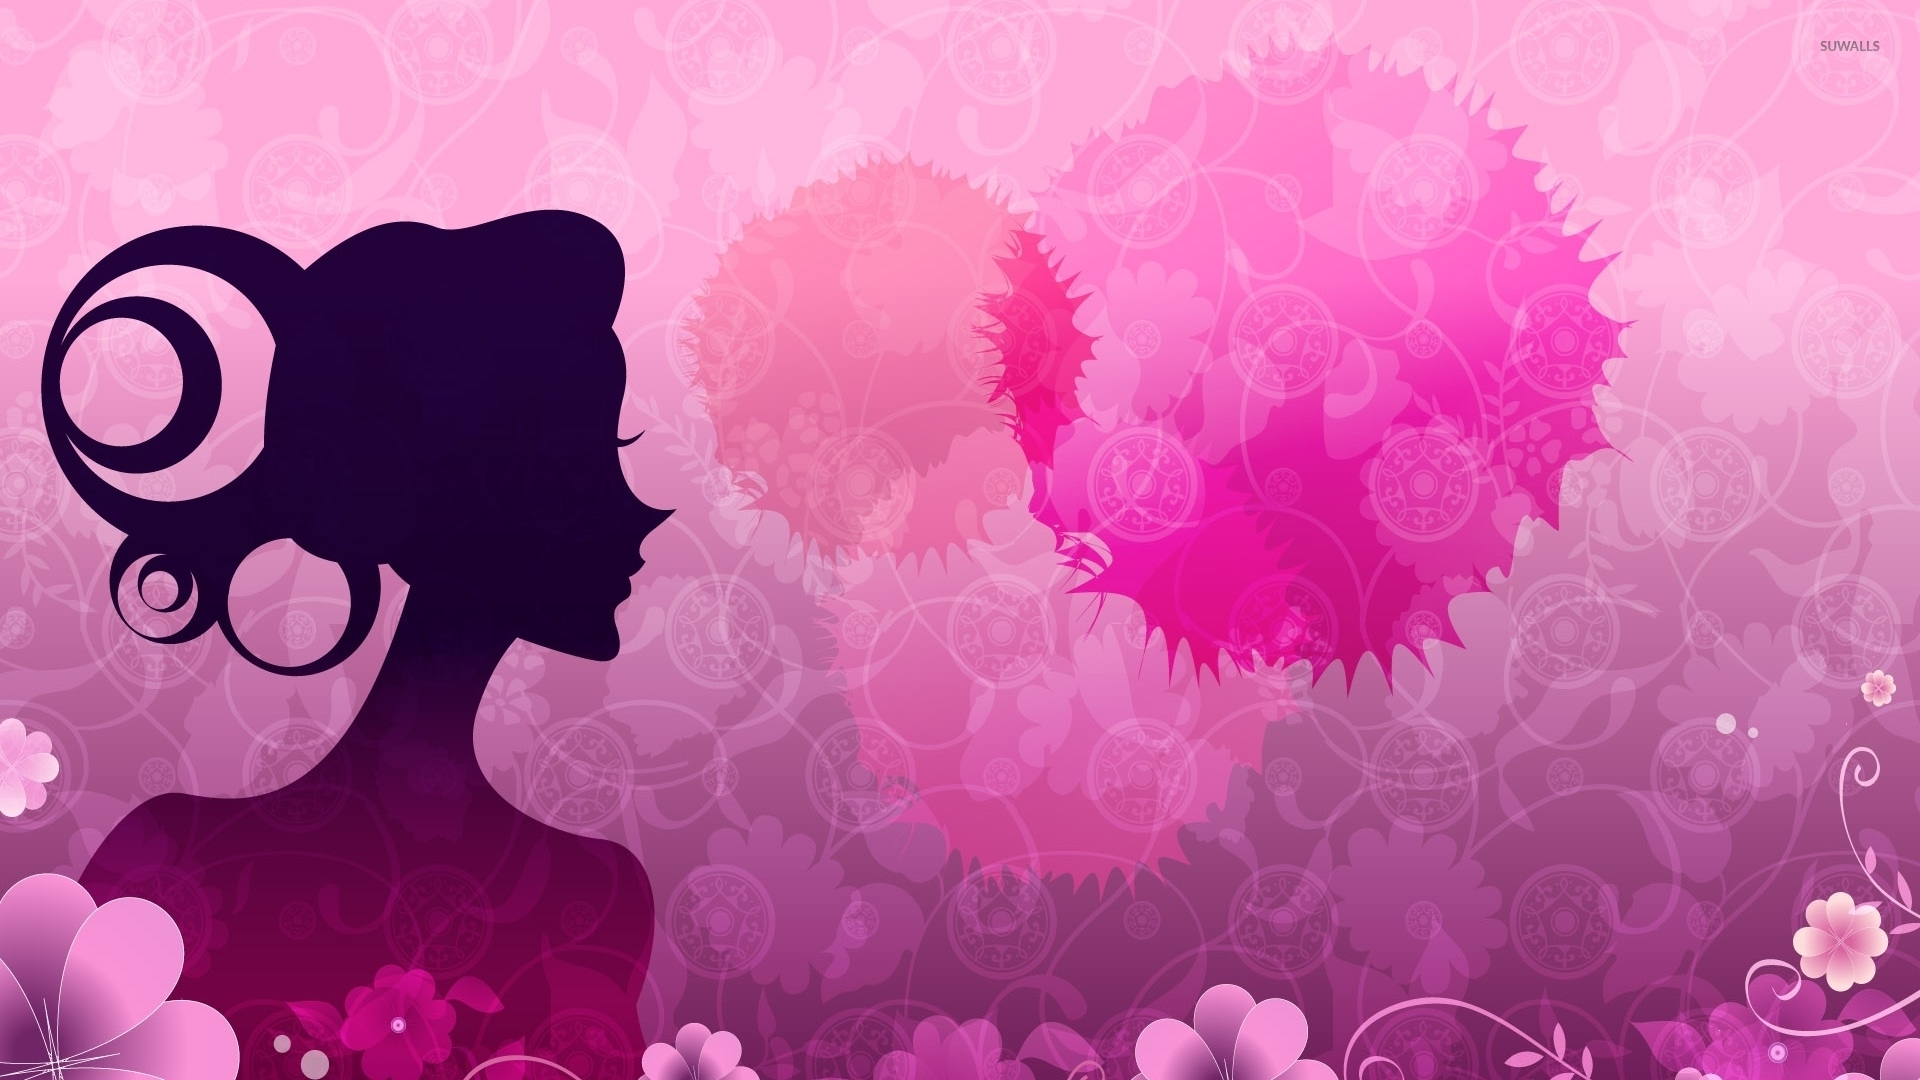 Download Woman silhouette by the pink flowers wallpaper - Vector ...